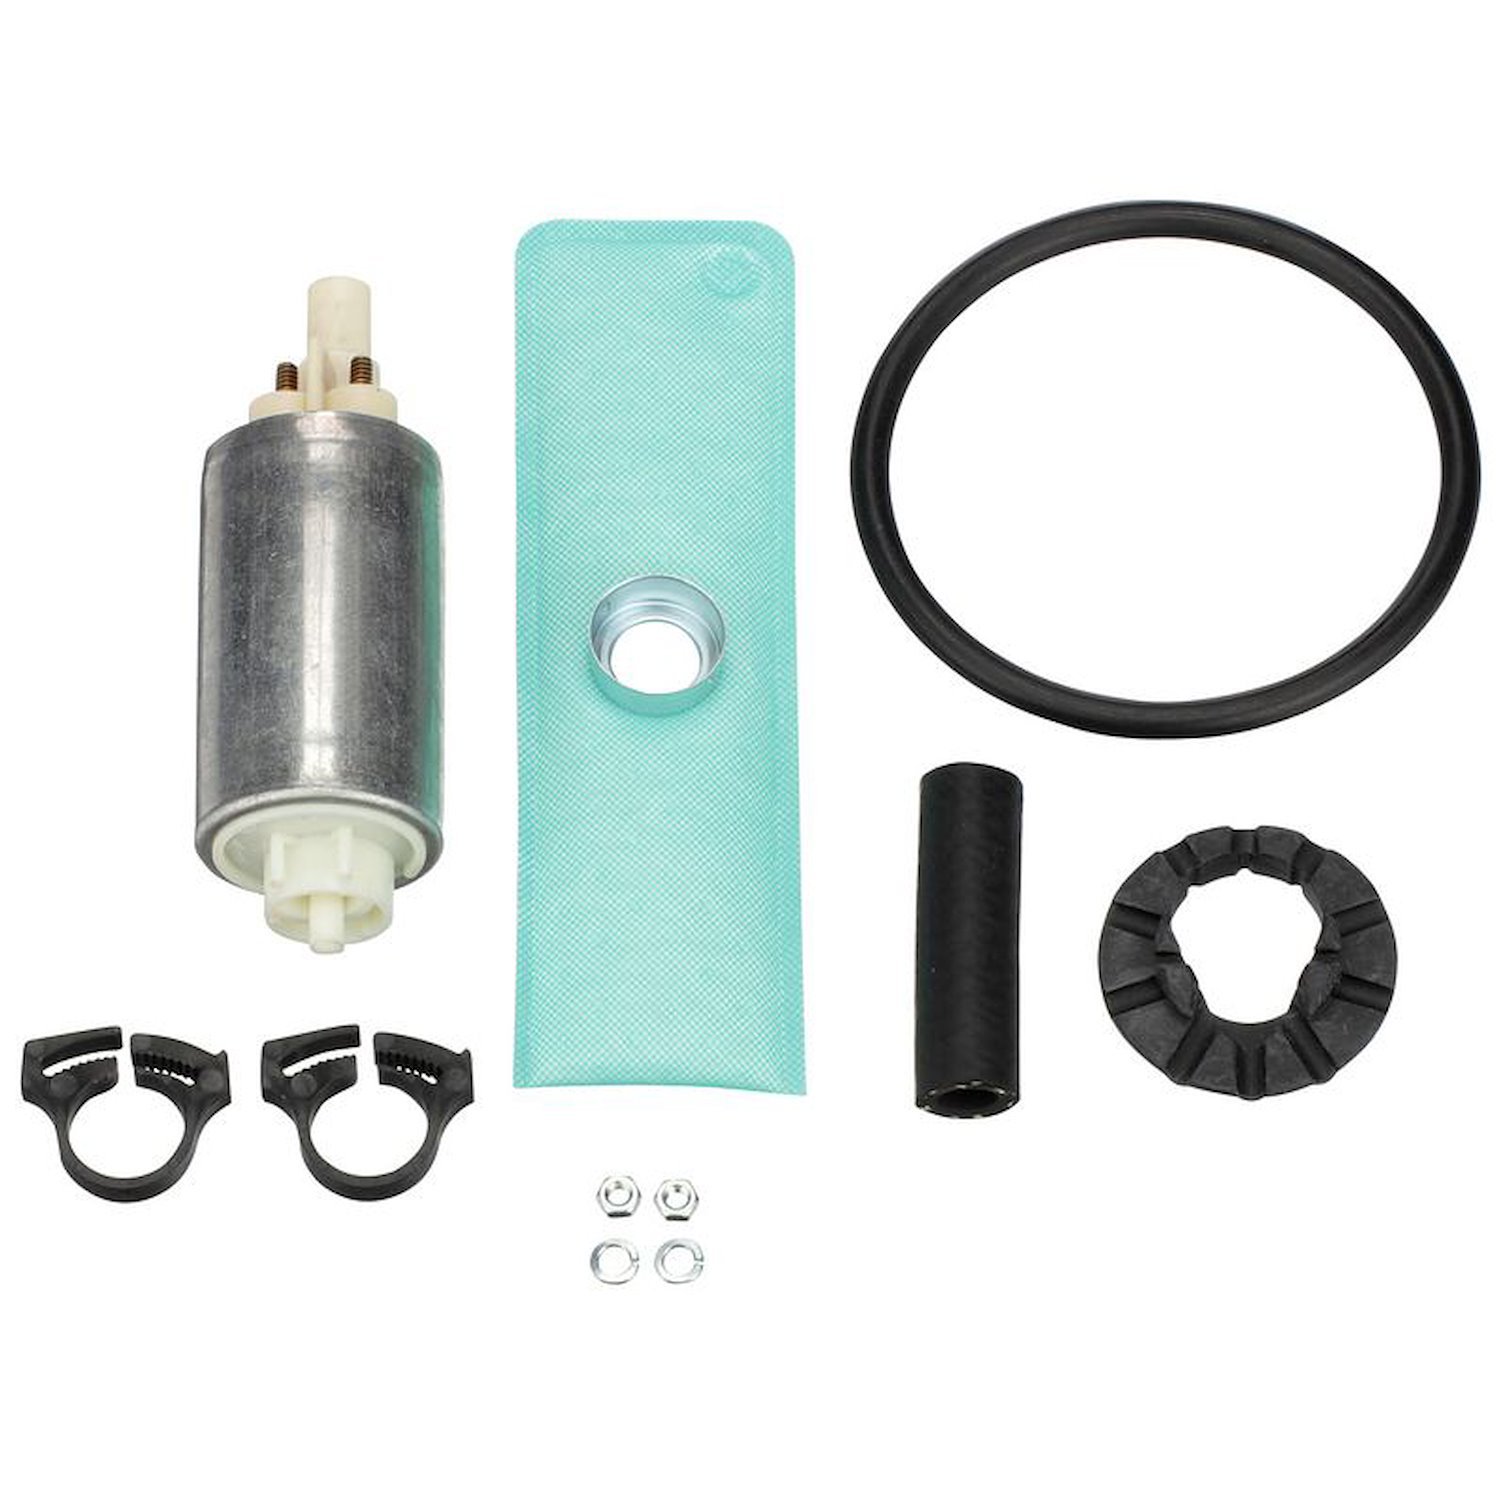 EFI In-Tank Electric Fuel Pump for 1976-1979 Cadillac